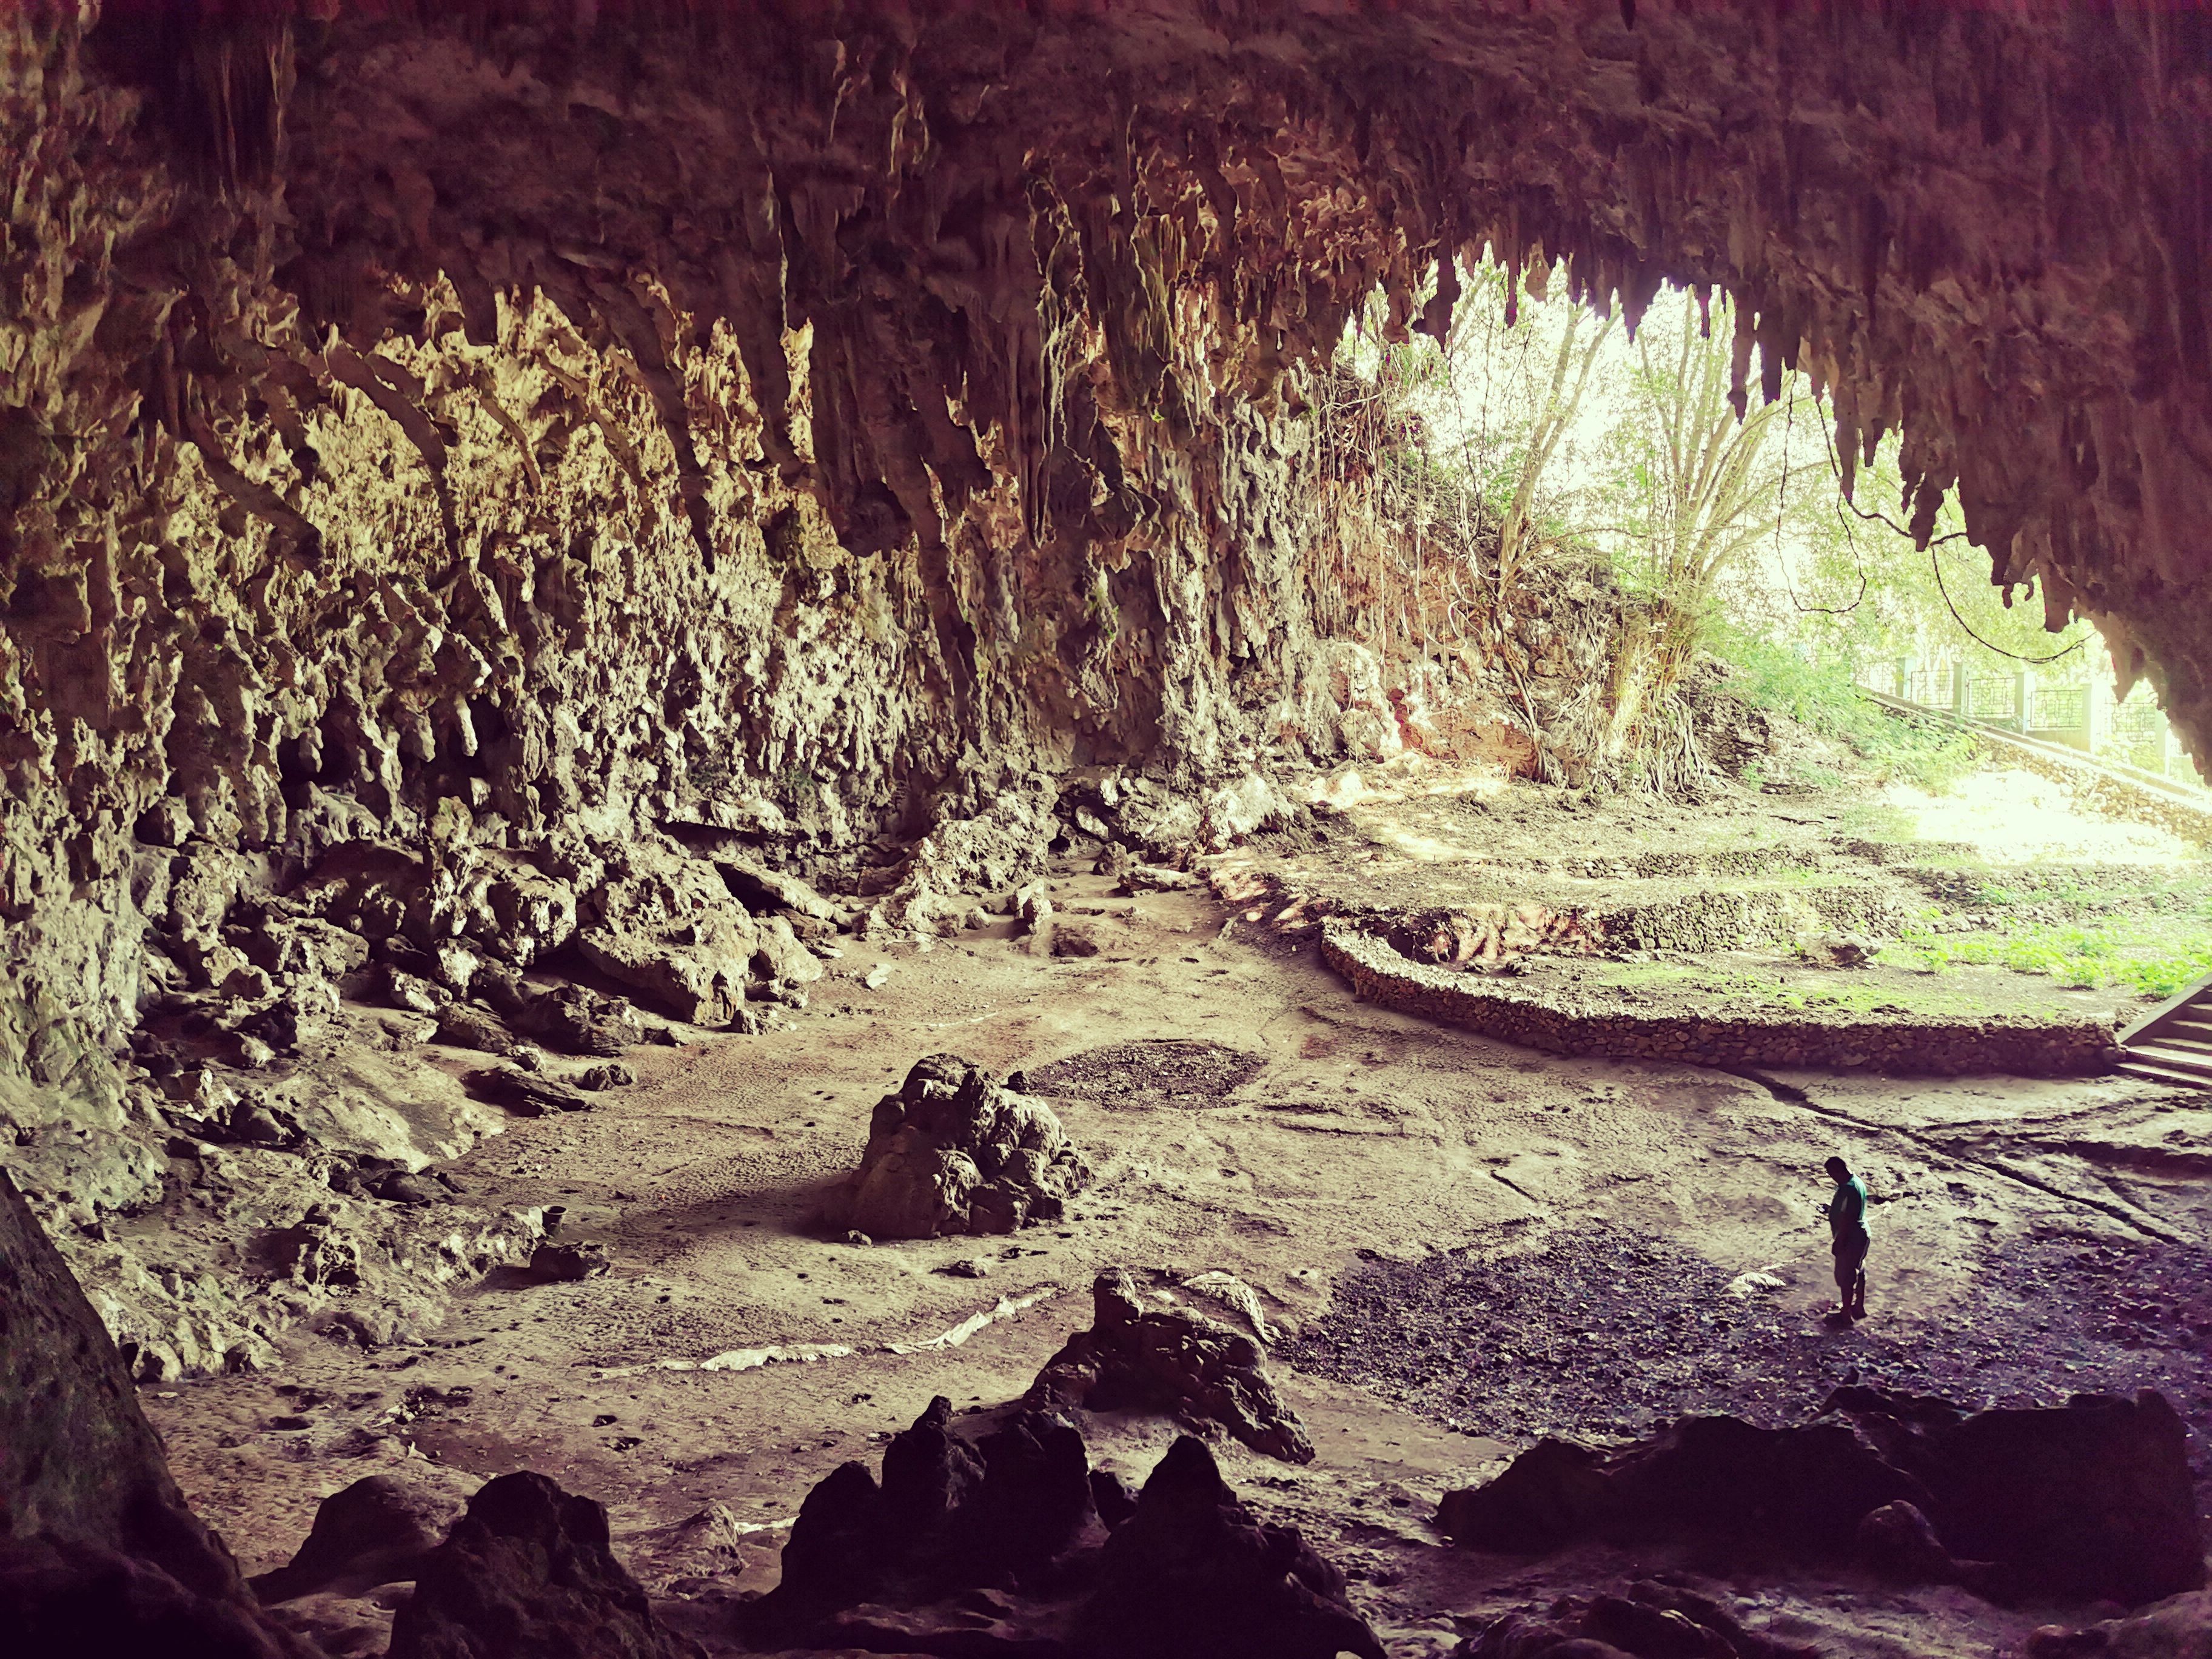 Liang Bua Cave of Homo Floresiensis in Indonesia